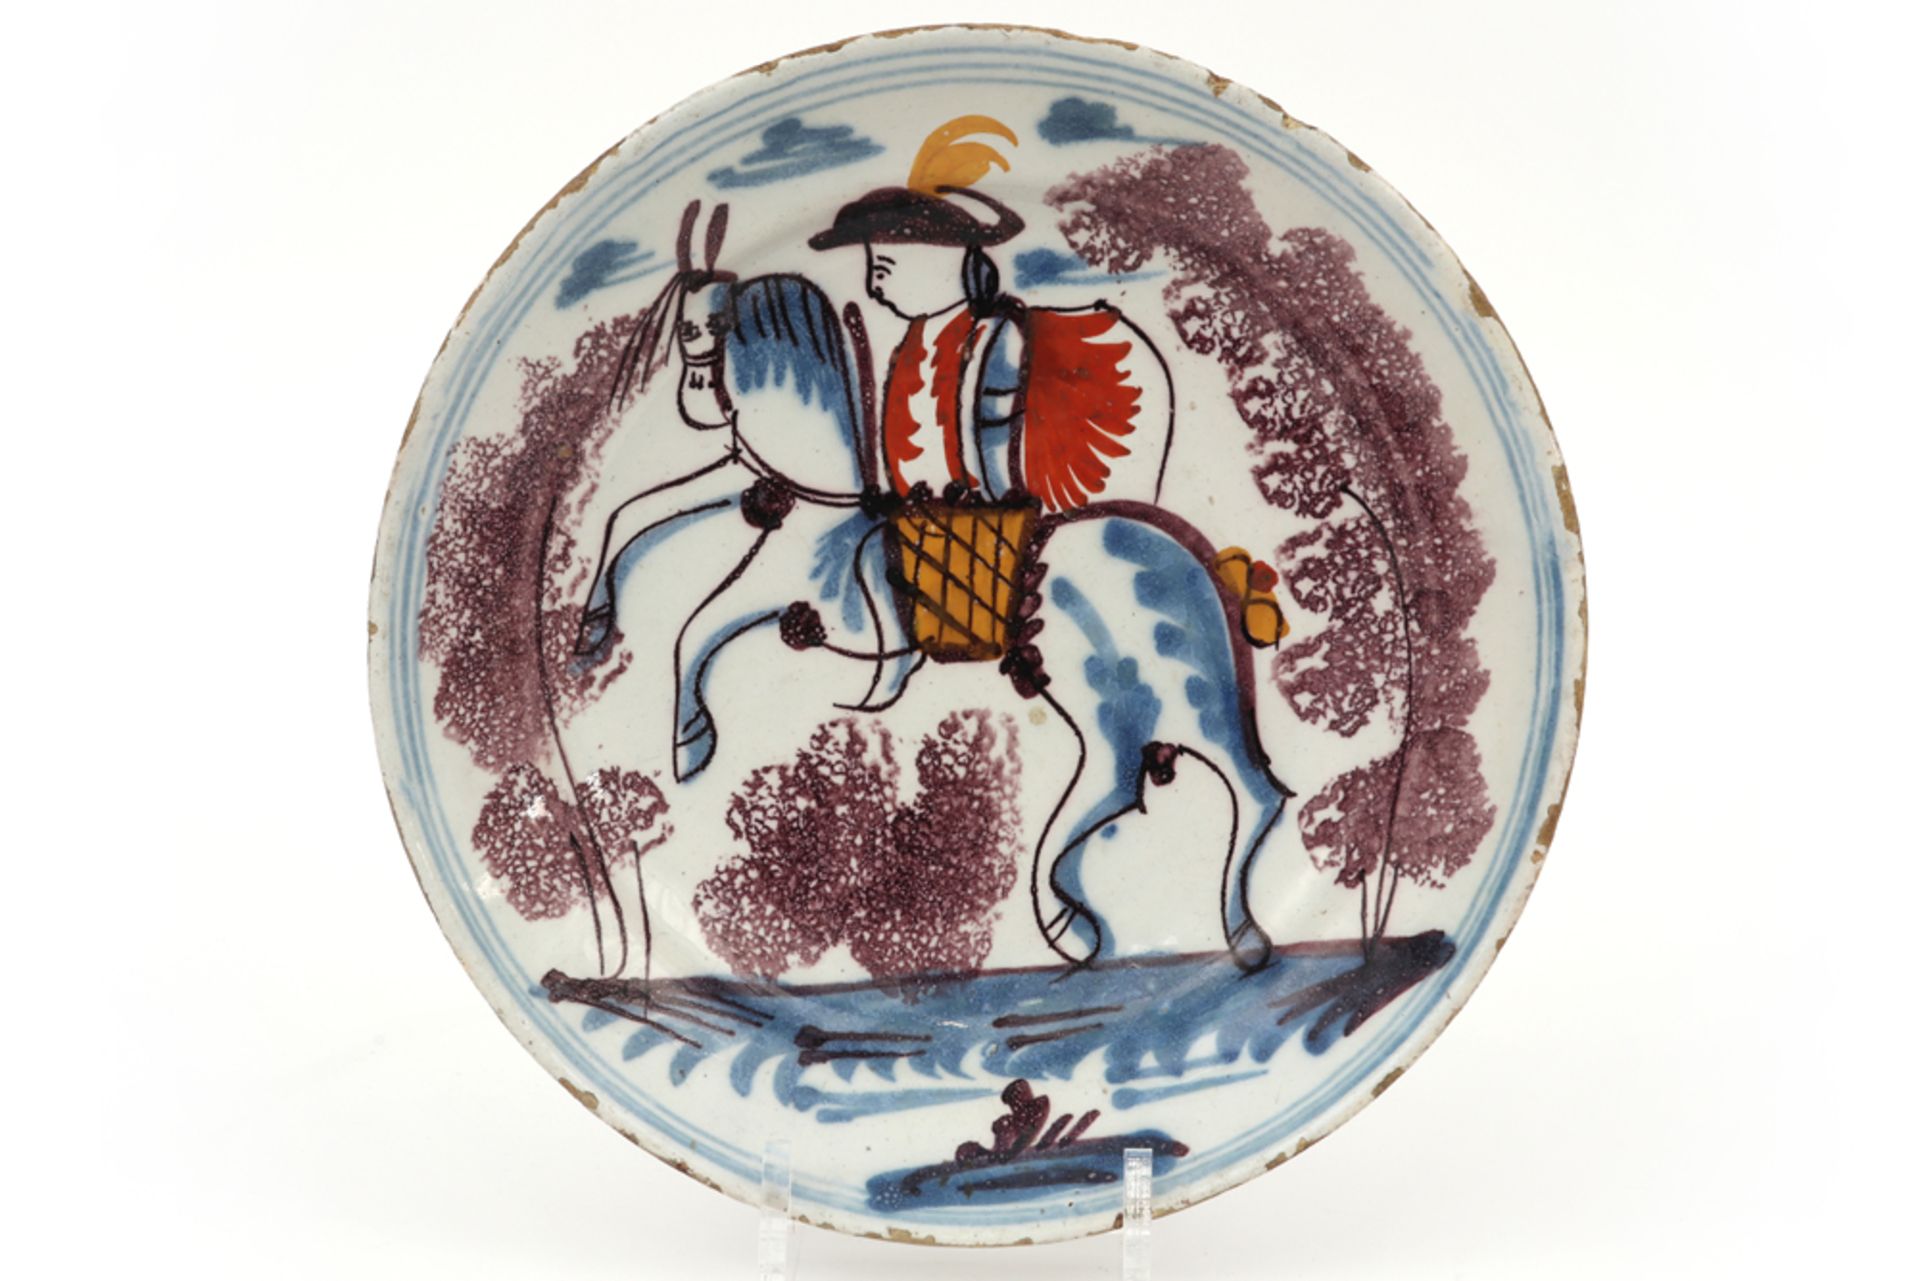 18th Cent. dish in ceramic from Delft with a polychrome decor with horseman || Achttiende eeuwse